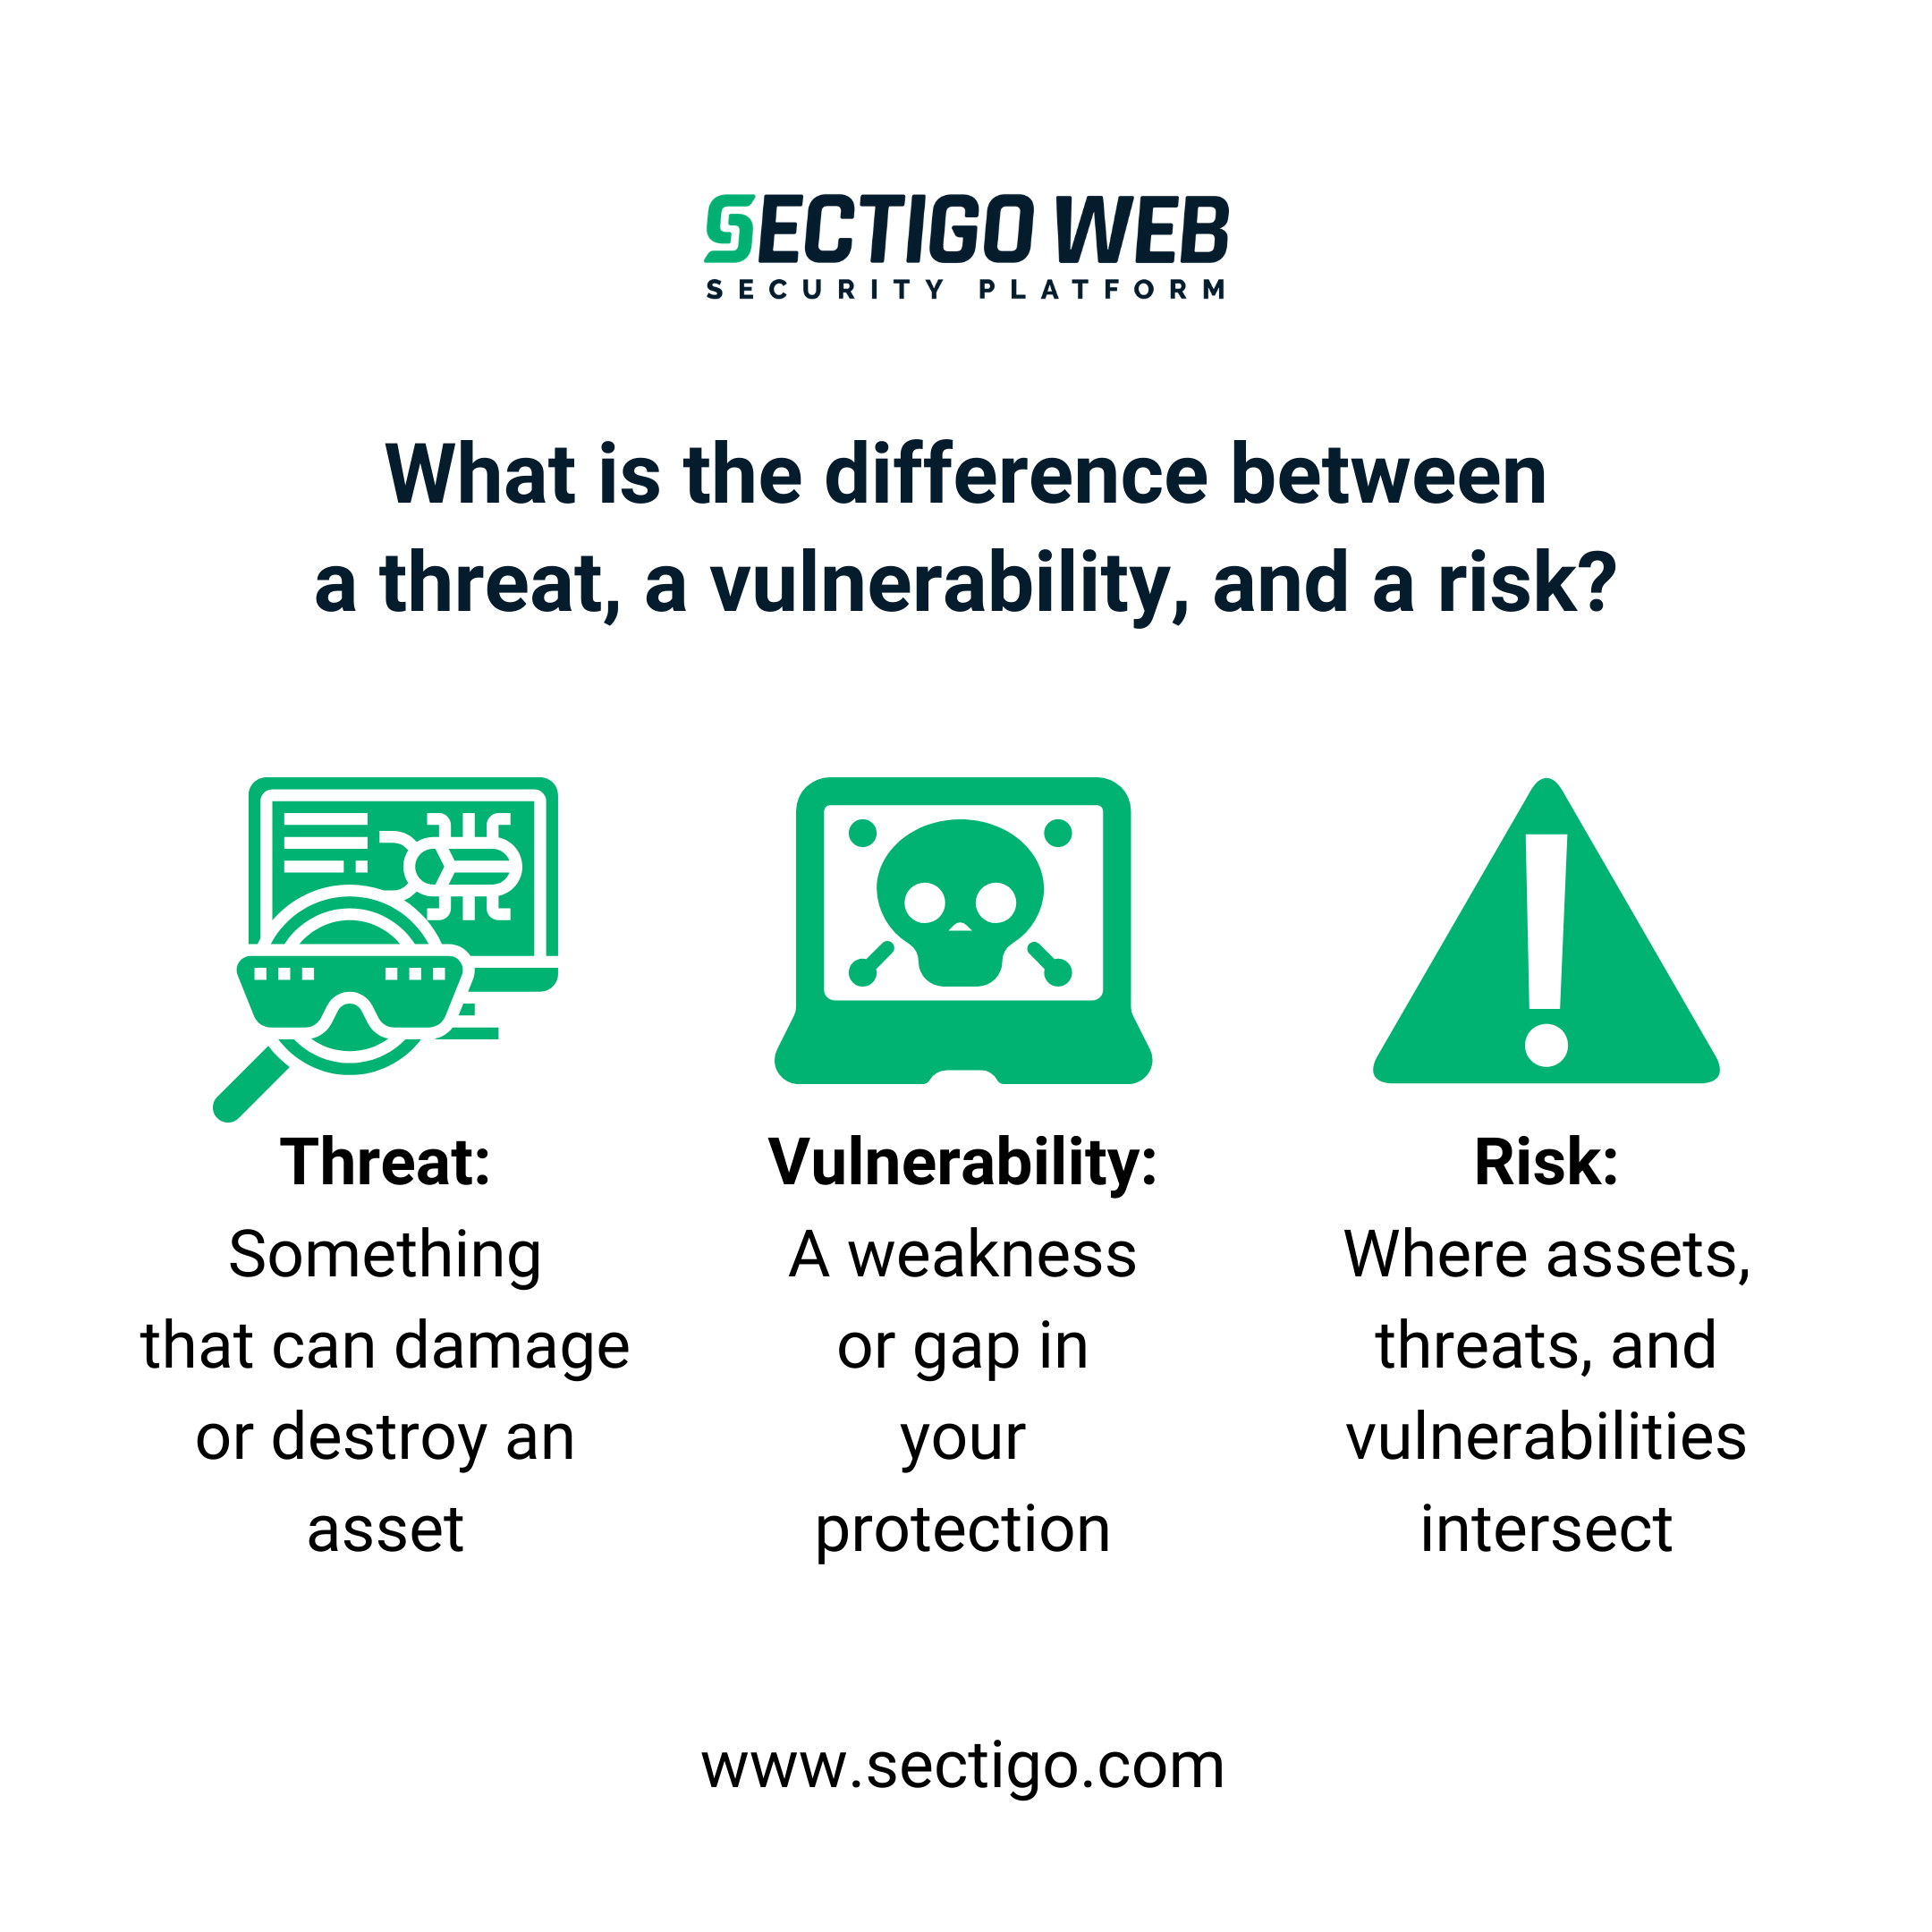 Sectigo defines what is the difference between a threat, a vulnerability, and a risk?